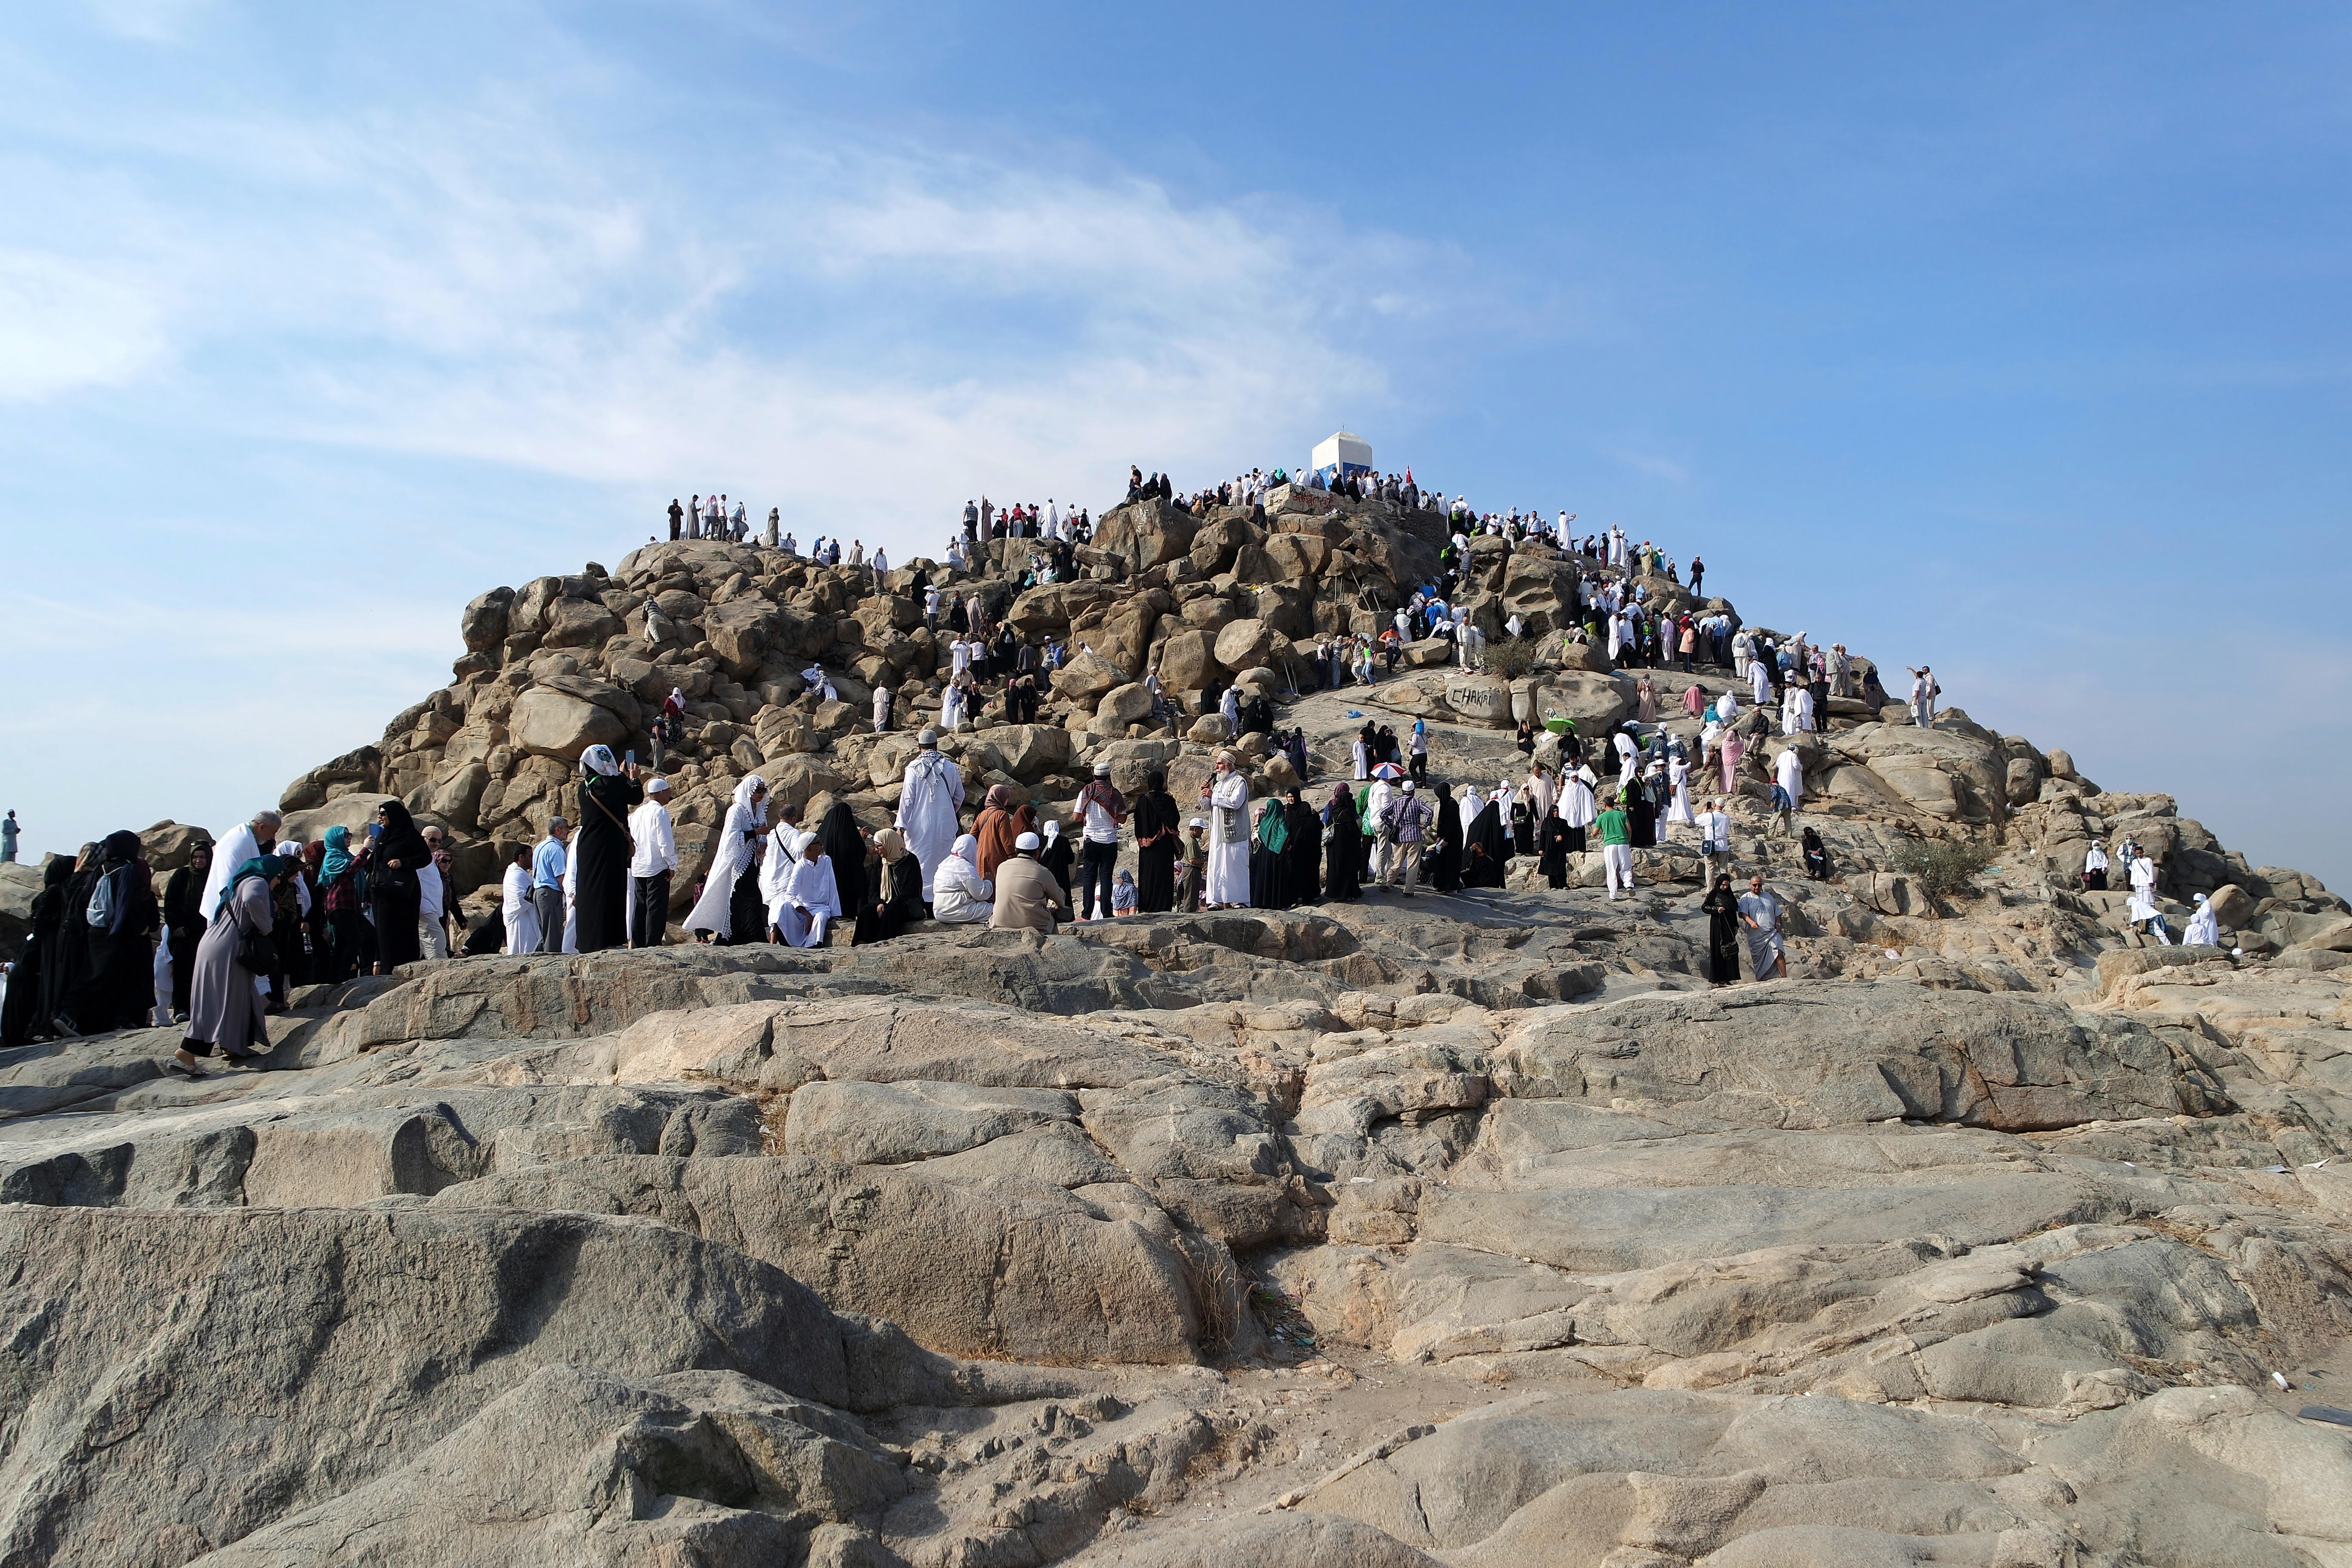 Pilgrims standing at Mount Arafat on the outskirts of Mecca.